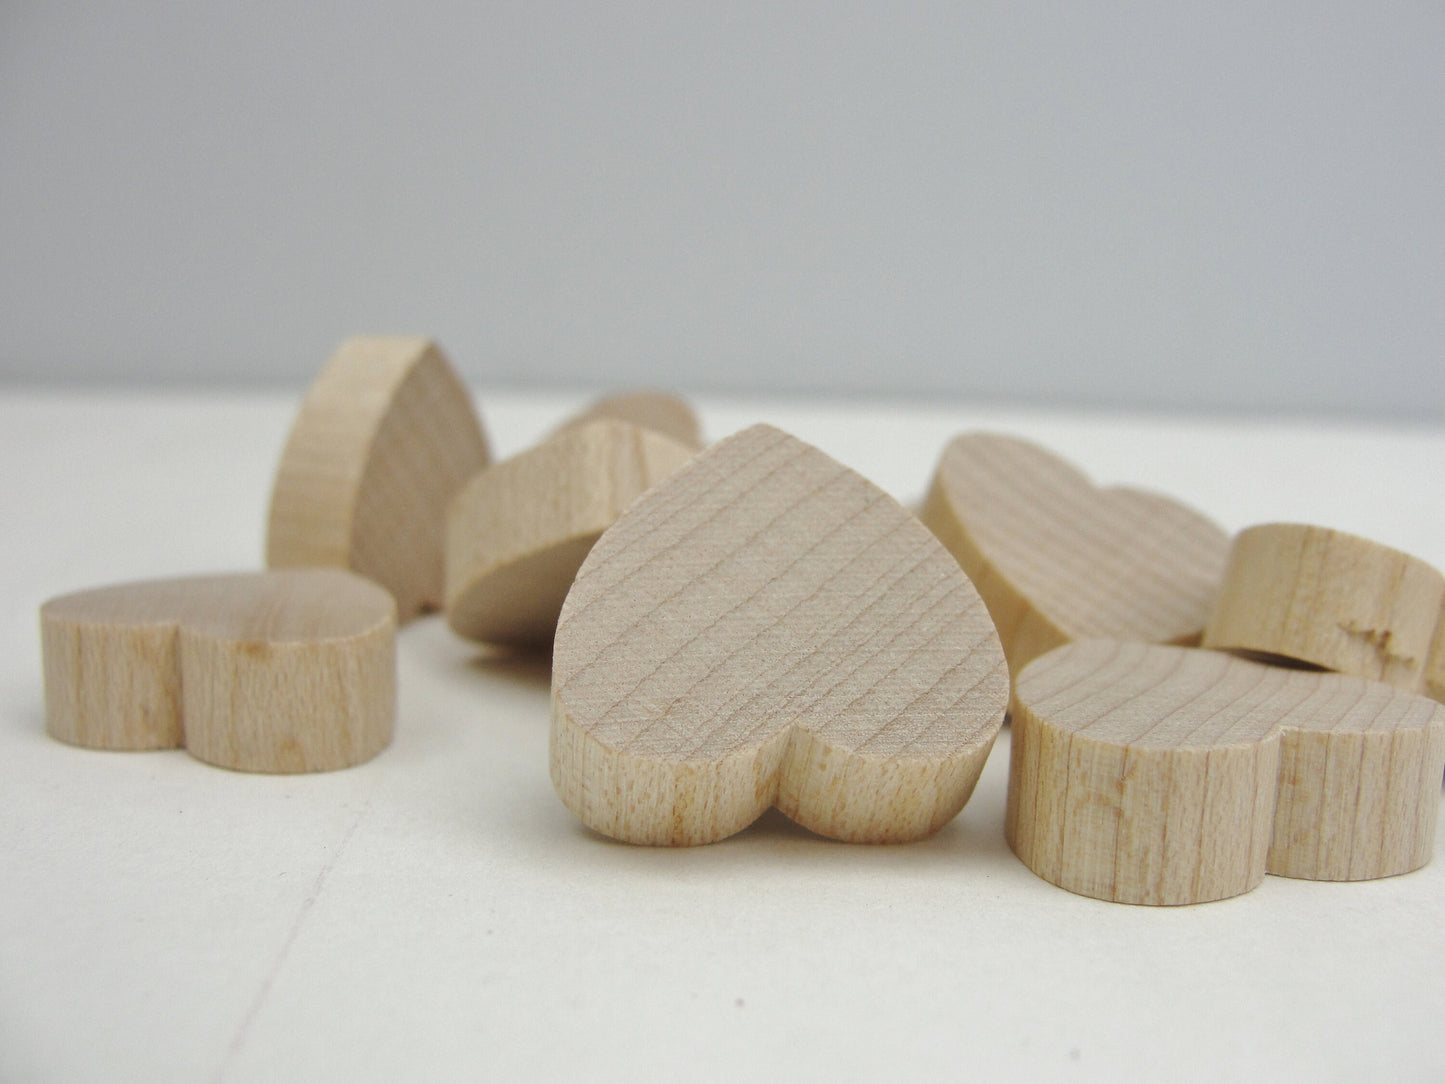 12 Wooden hearts 3/4" wide, 1/4" thick unfinished wood hearts diy